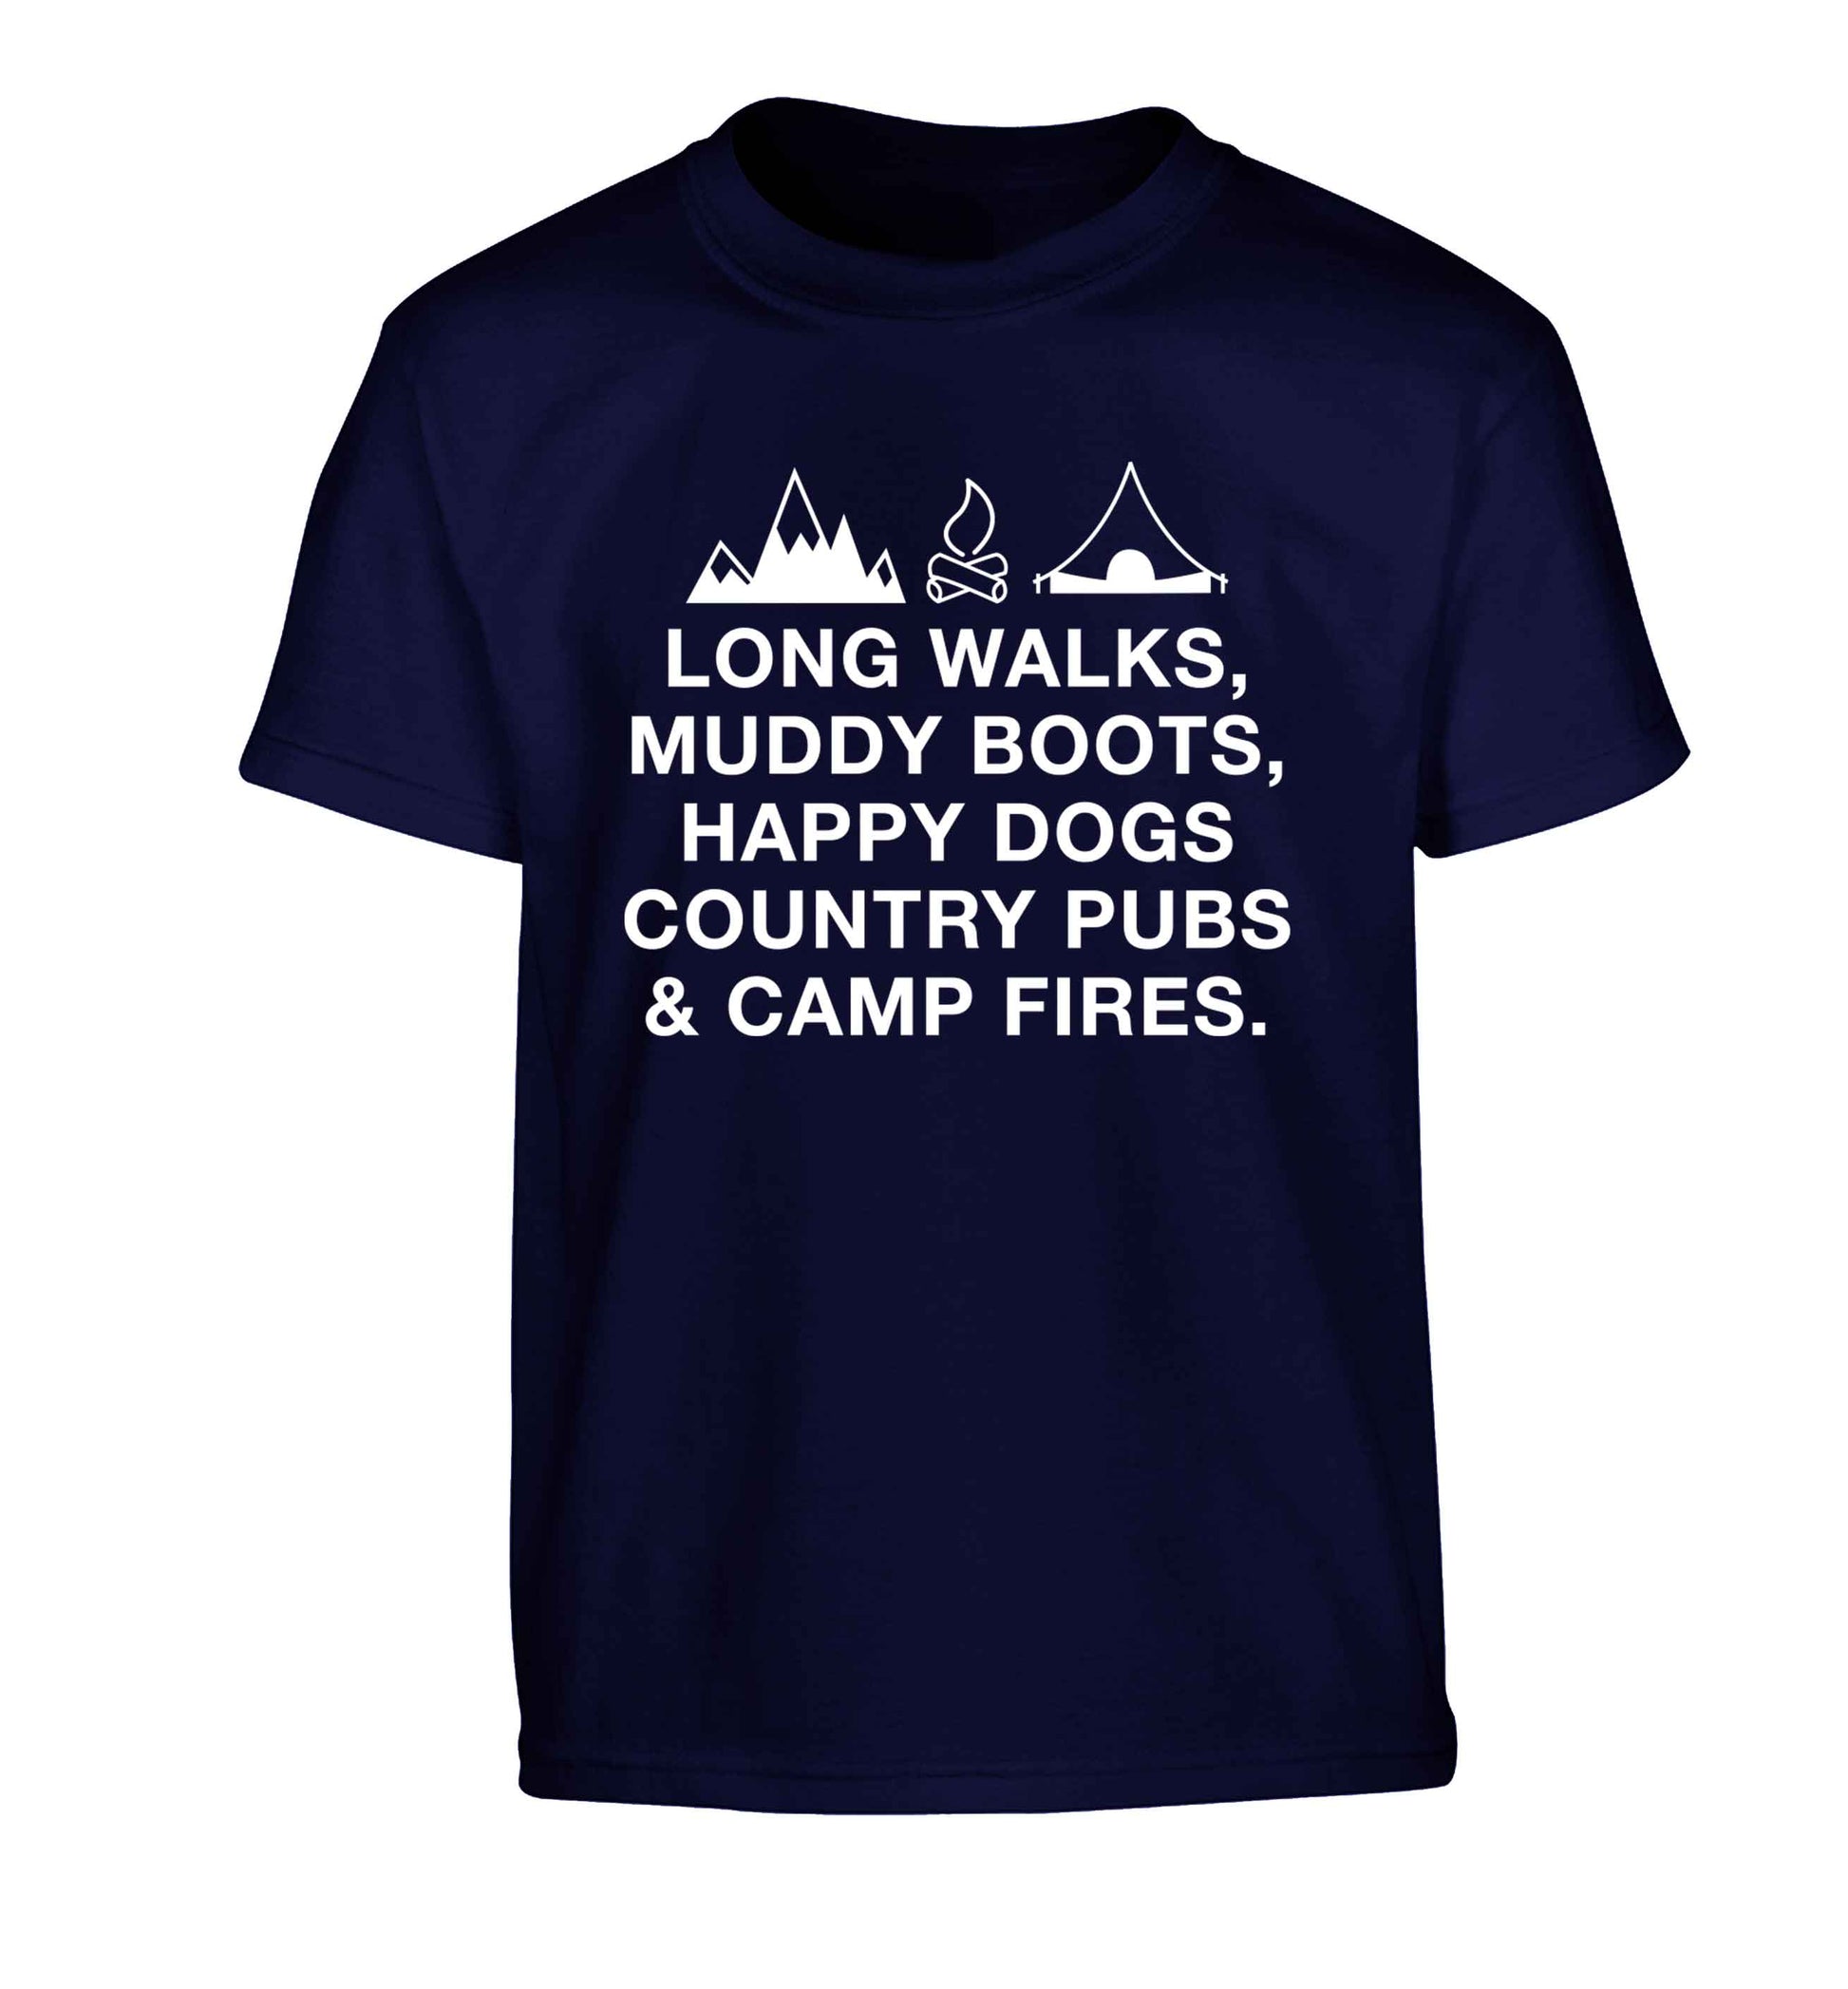 Long walks muddy boots happy dogs country pubs and camp fires Children's navy Tshirt 12-13 Years